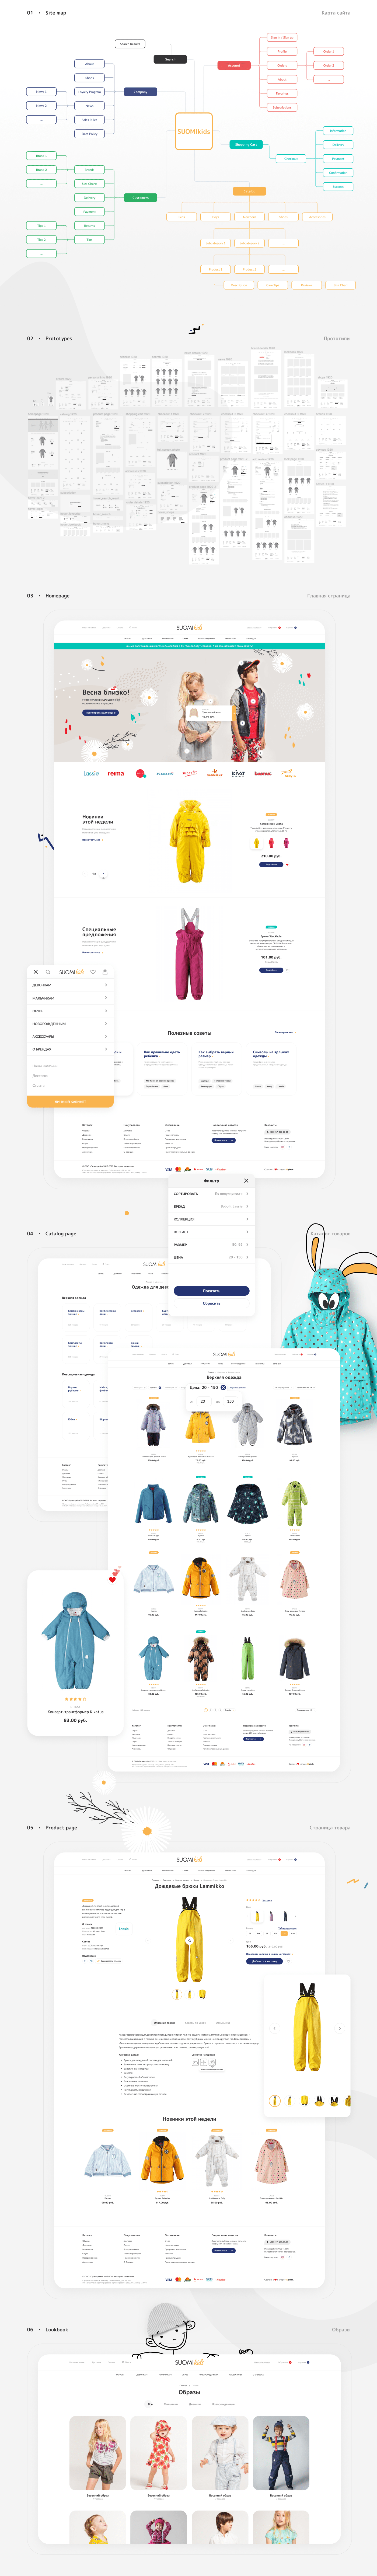 Onlineshop Веб site onlinestore kids ux UI user interface user experience